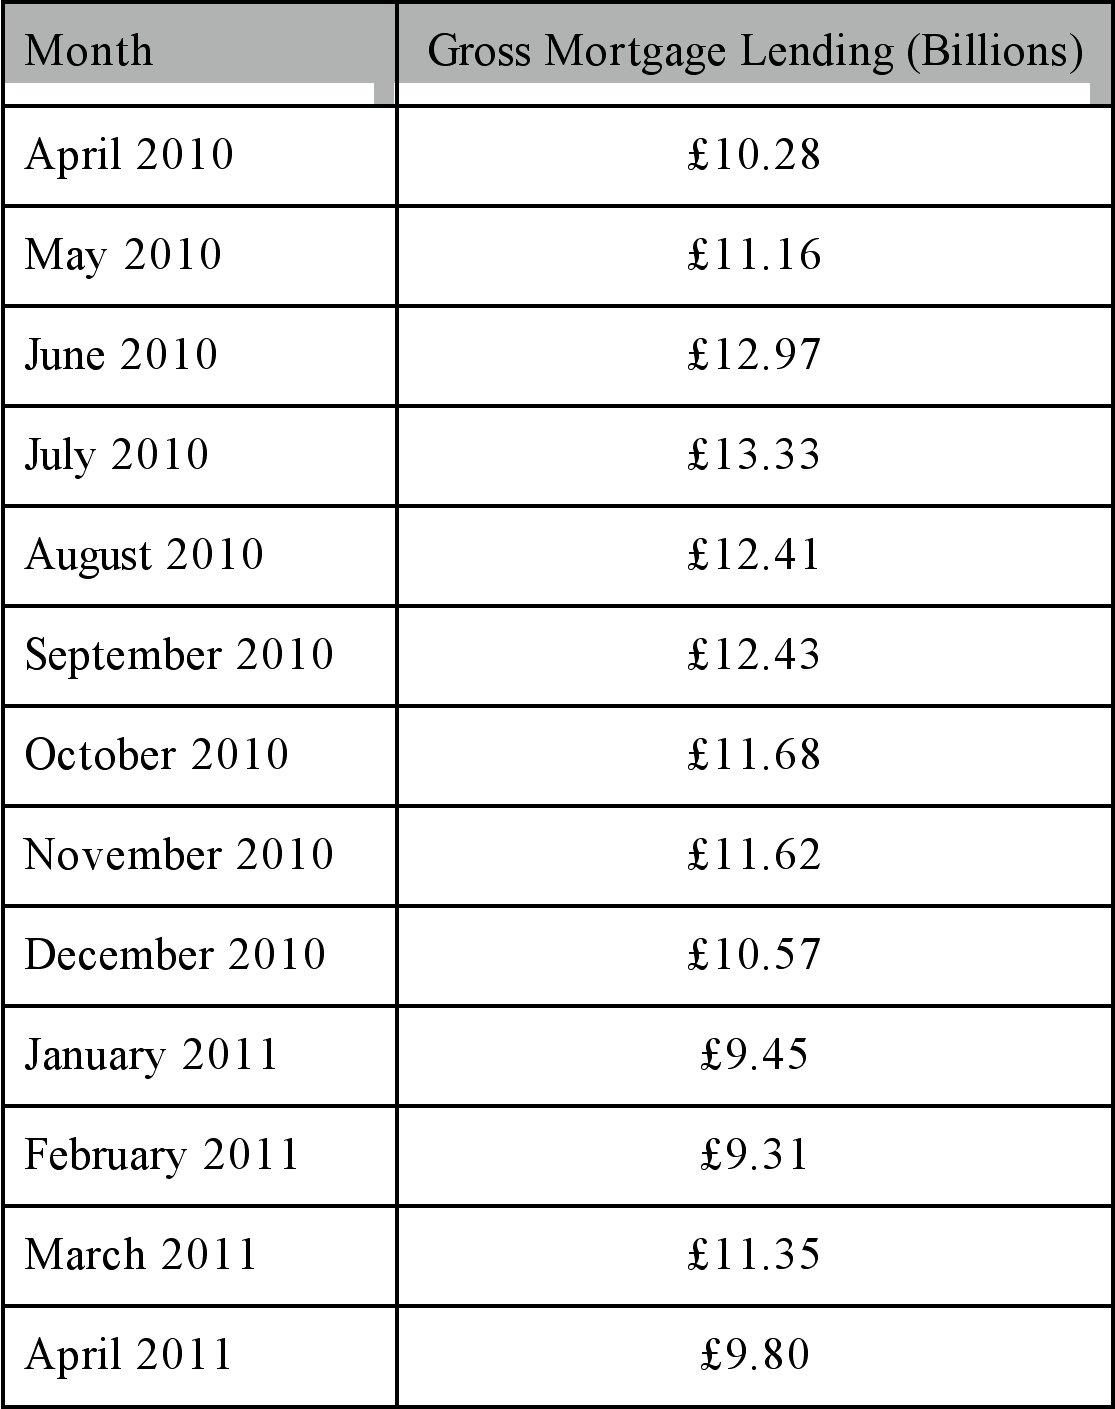 Table showing gross mortgage lending per month